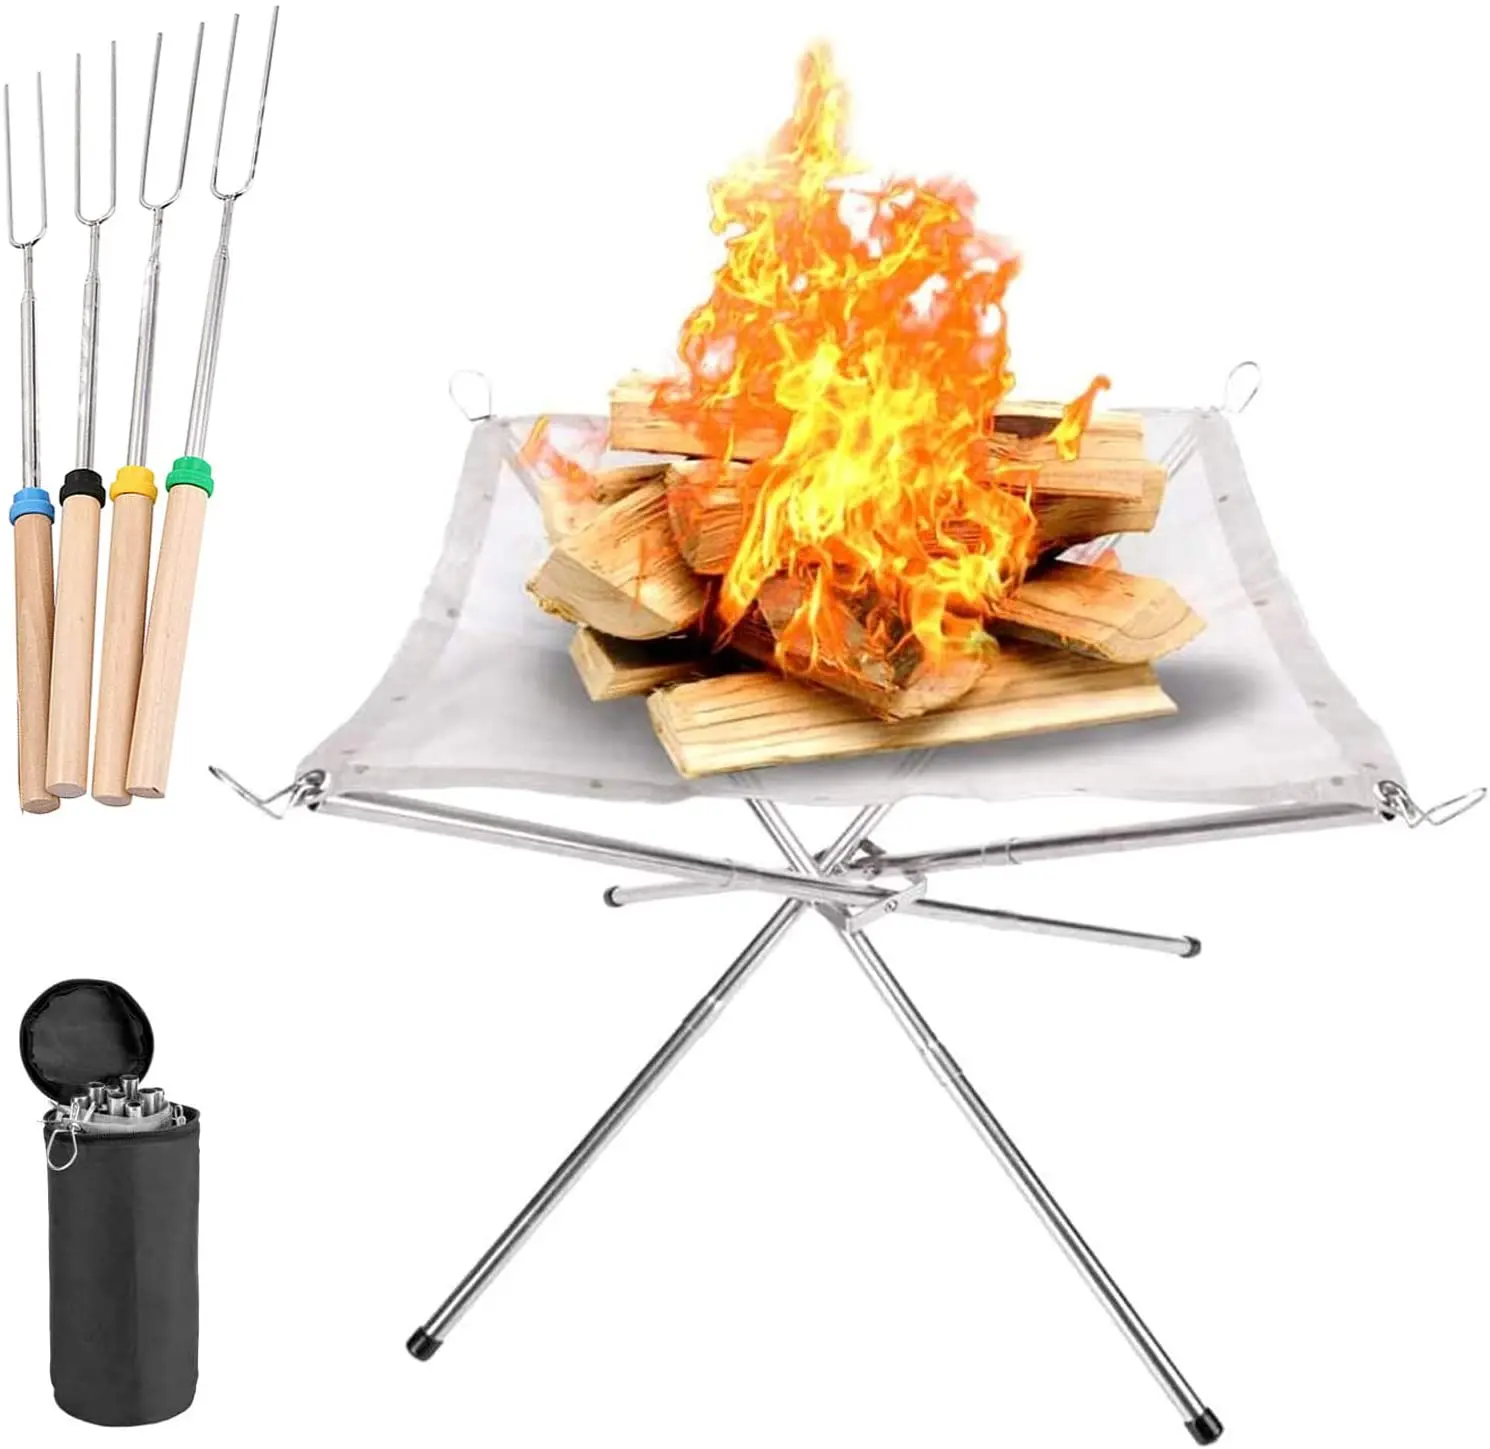 

Portable Camping Fire Pit with 4 Wooden Handle BBQ forks Foldable Outdoor Camping Steel Mesh Fire Pit Fireplace for Patio Garden